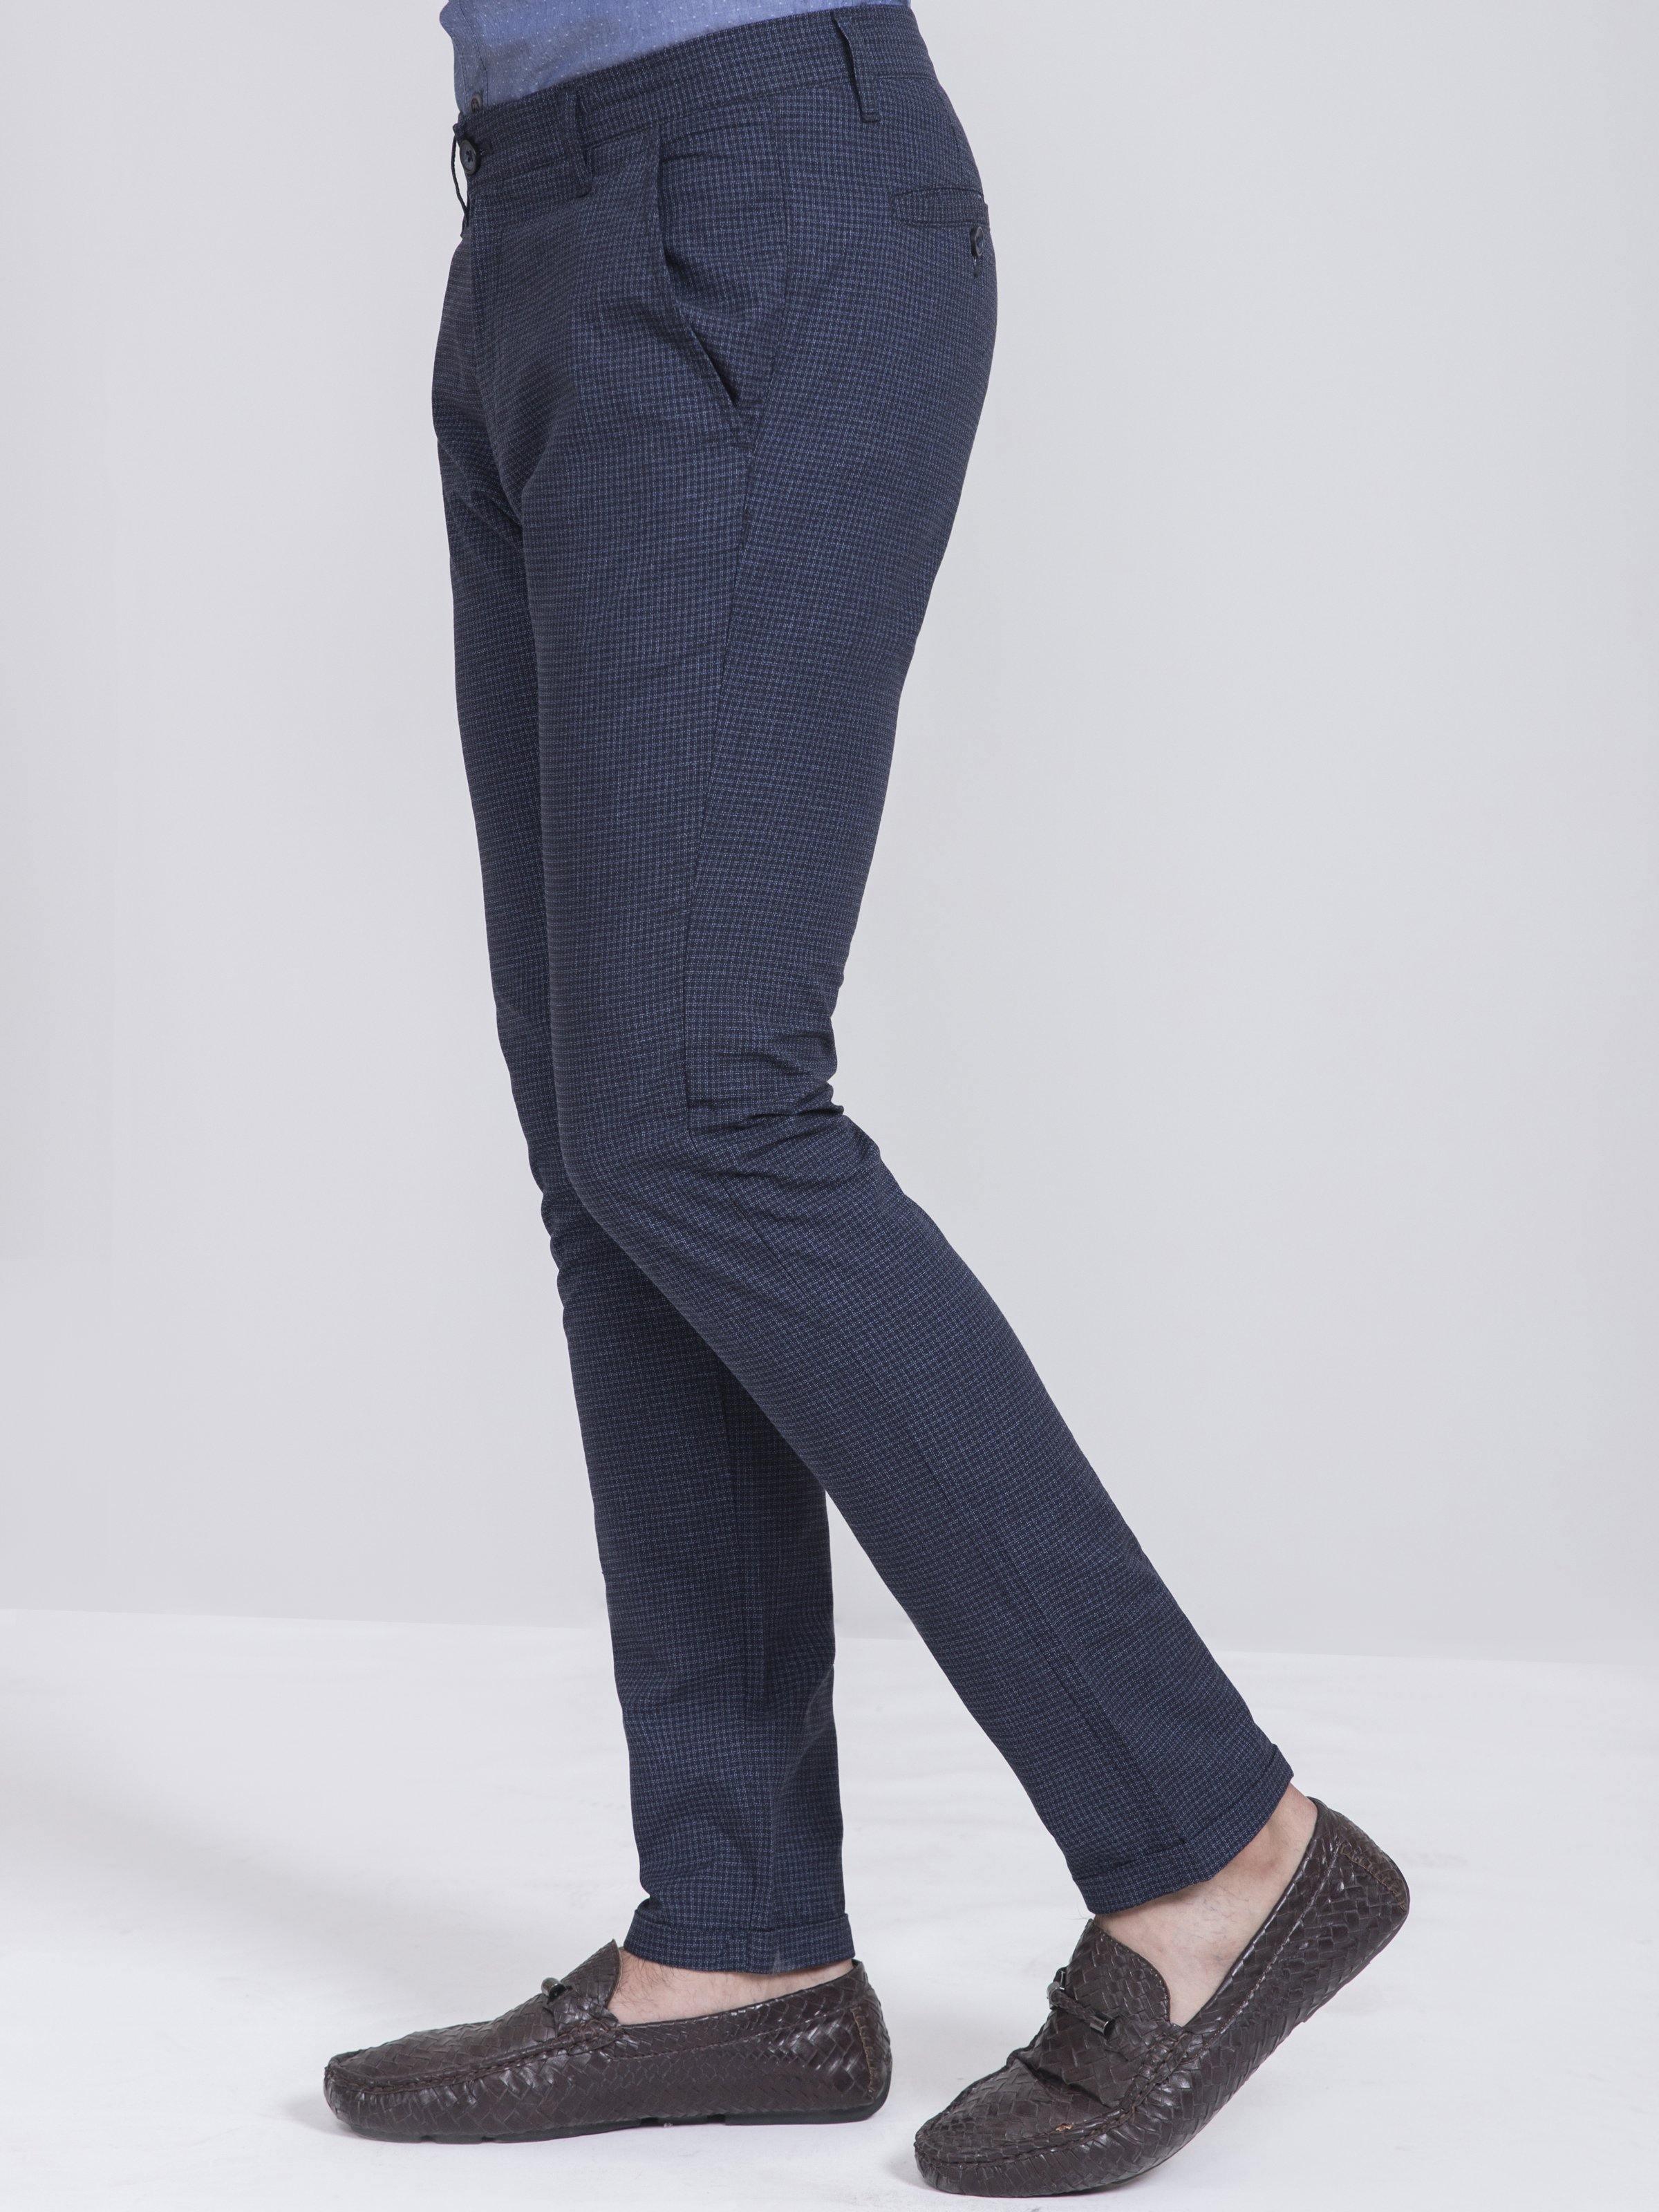 CASUAL PANT SLIM FIT NAVY BLUE CHECK at Charcoal Clothing